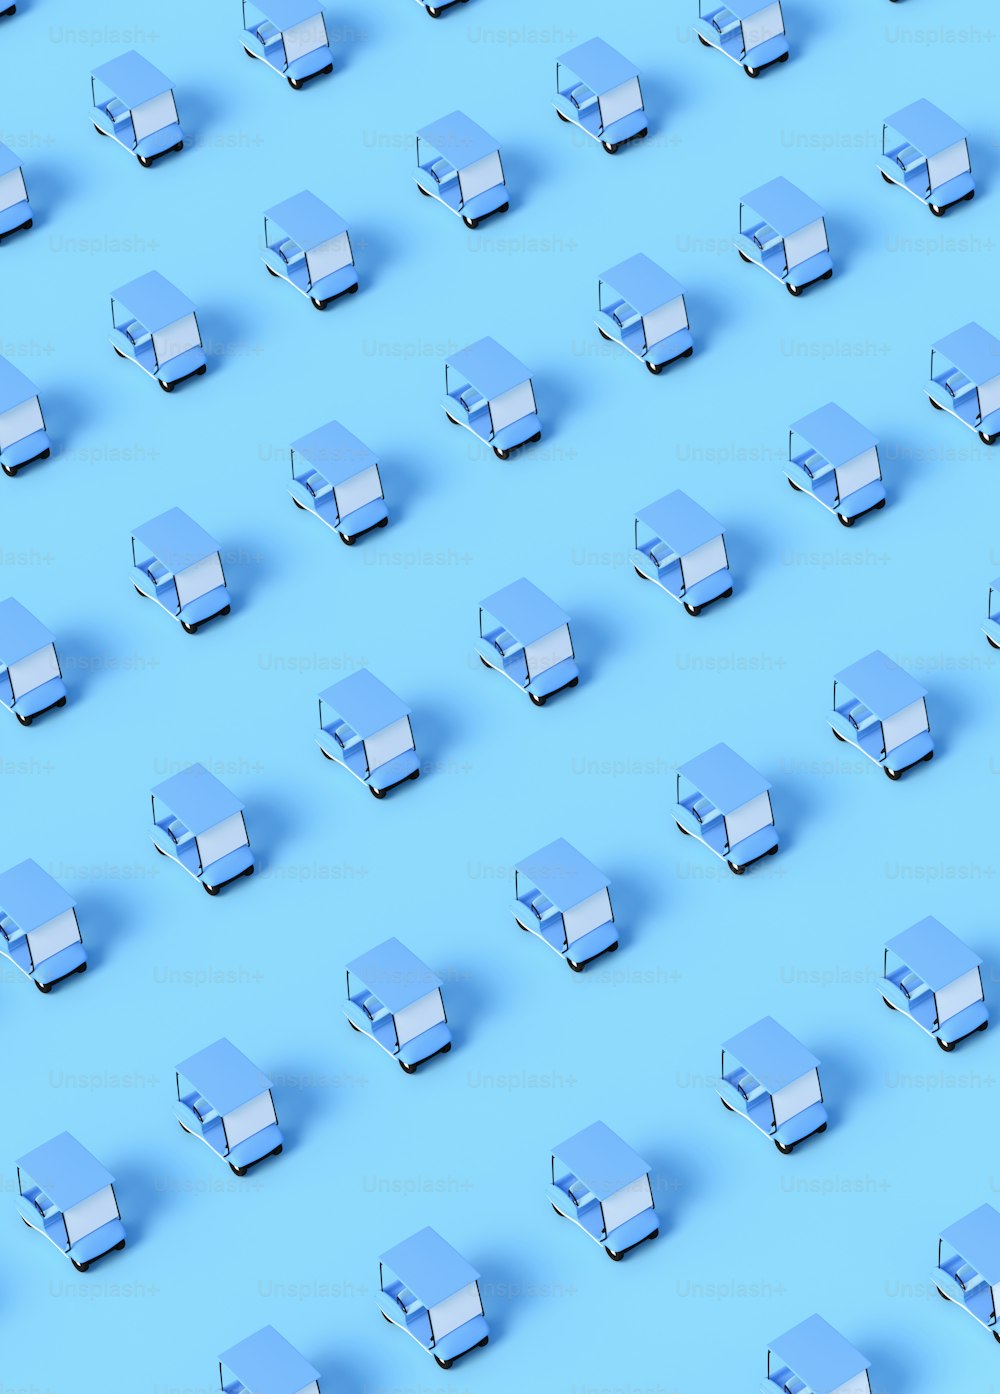 a lot of small blue objects on a blue background